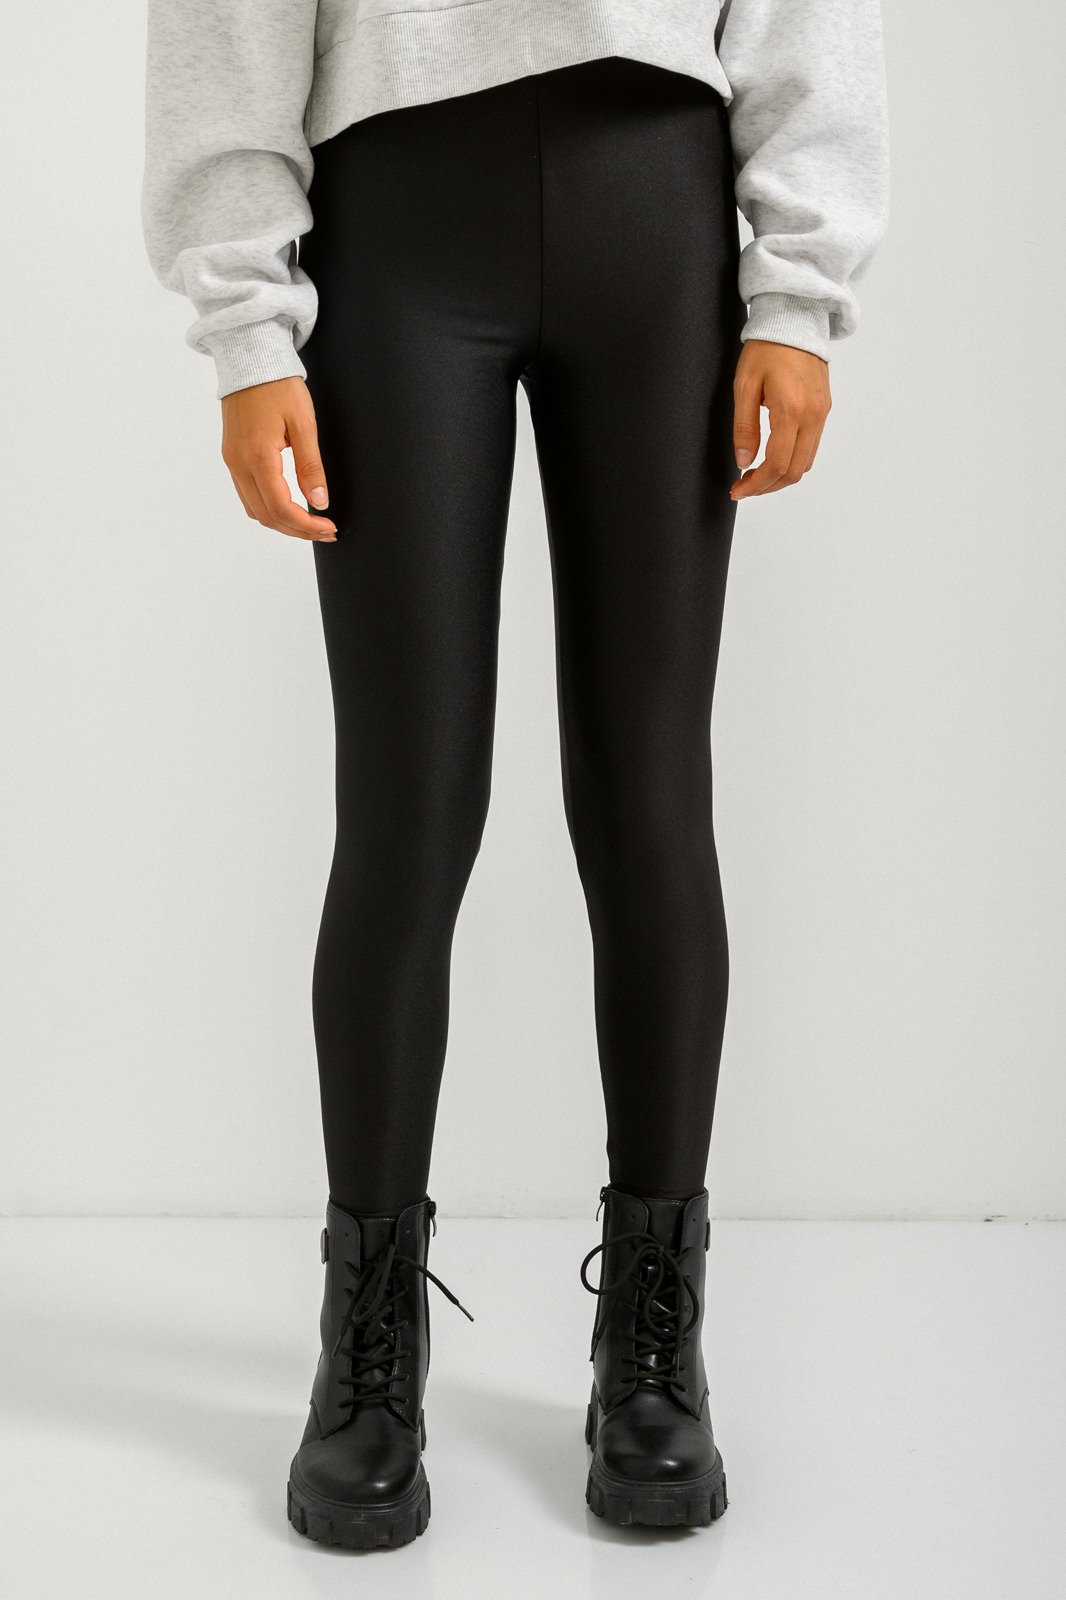 Wet look leggings Topshop | How to style faux leather leggings, Fall  fashion trends, Fashion